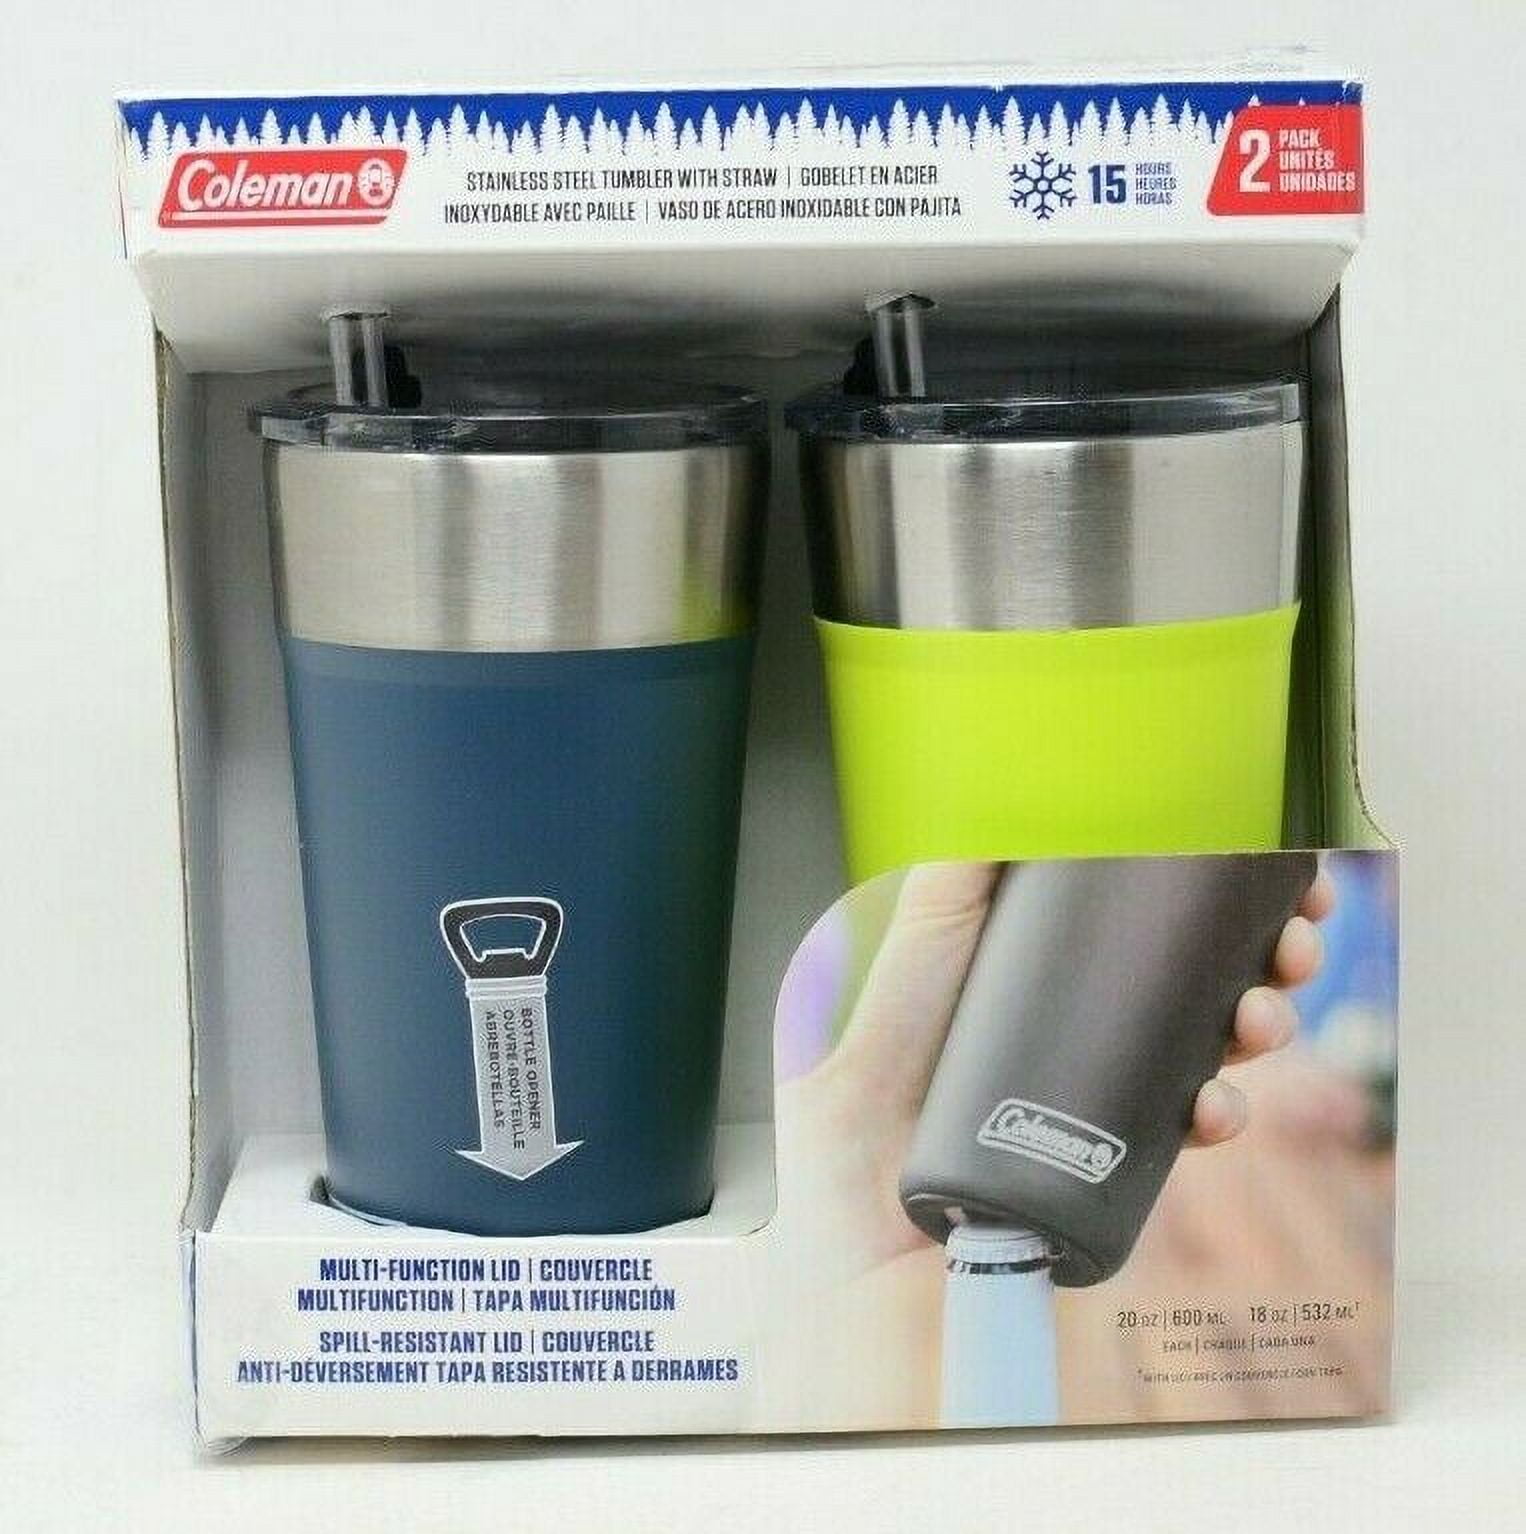 Coleman 20oz Stainless Steel Tumblers w/ Straws 2-Pack Just $13.99 at Costco